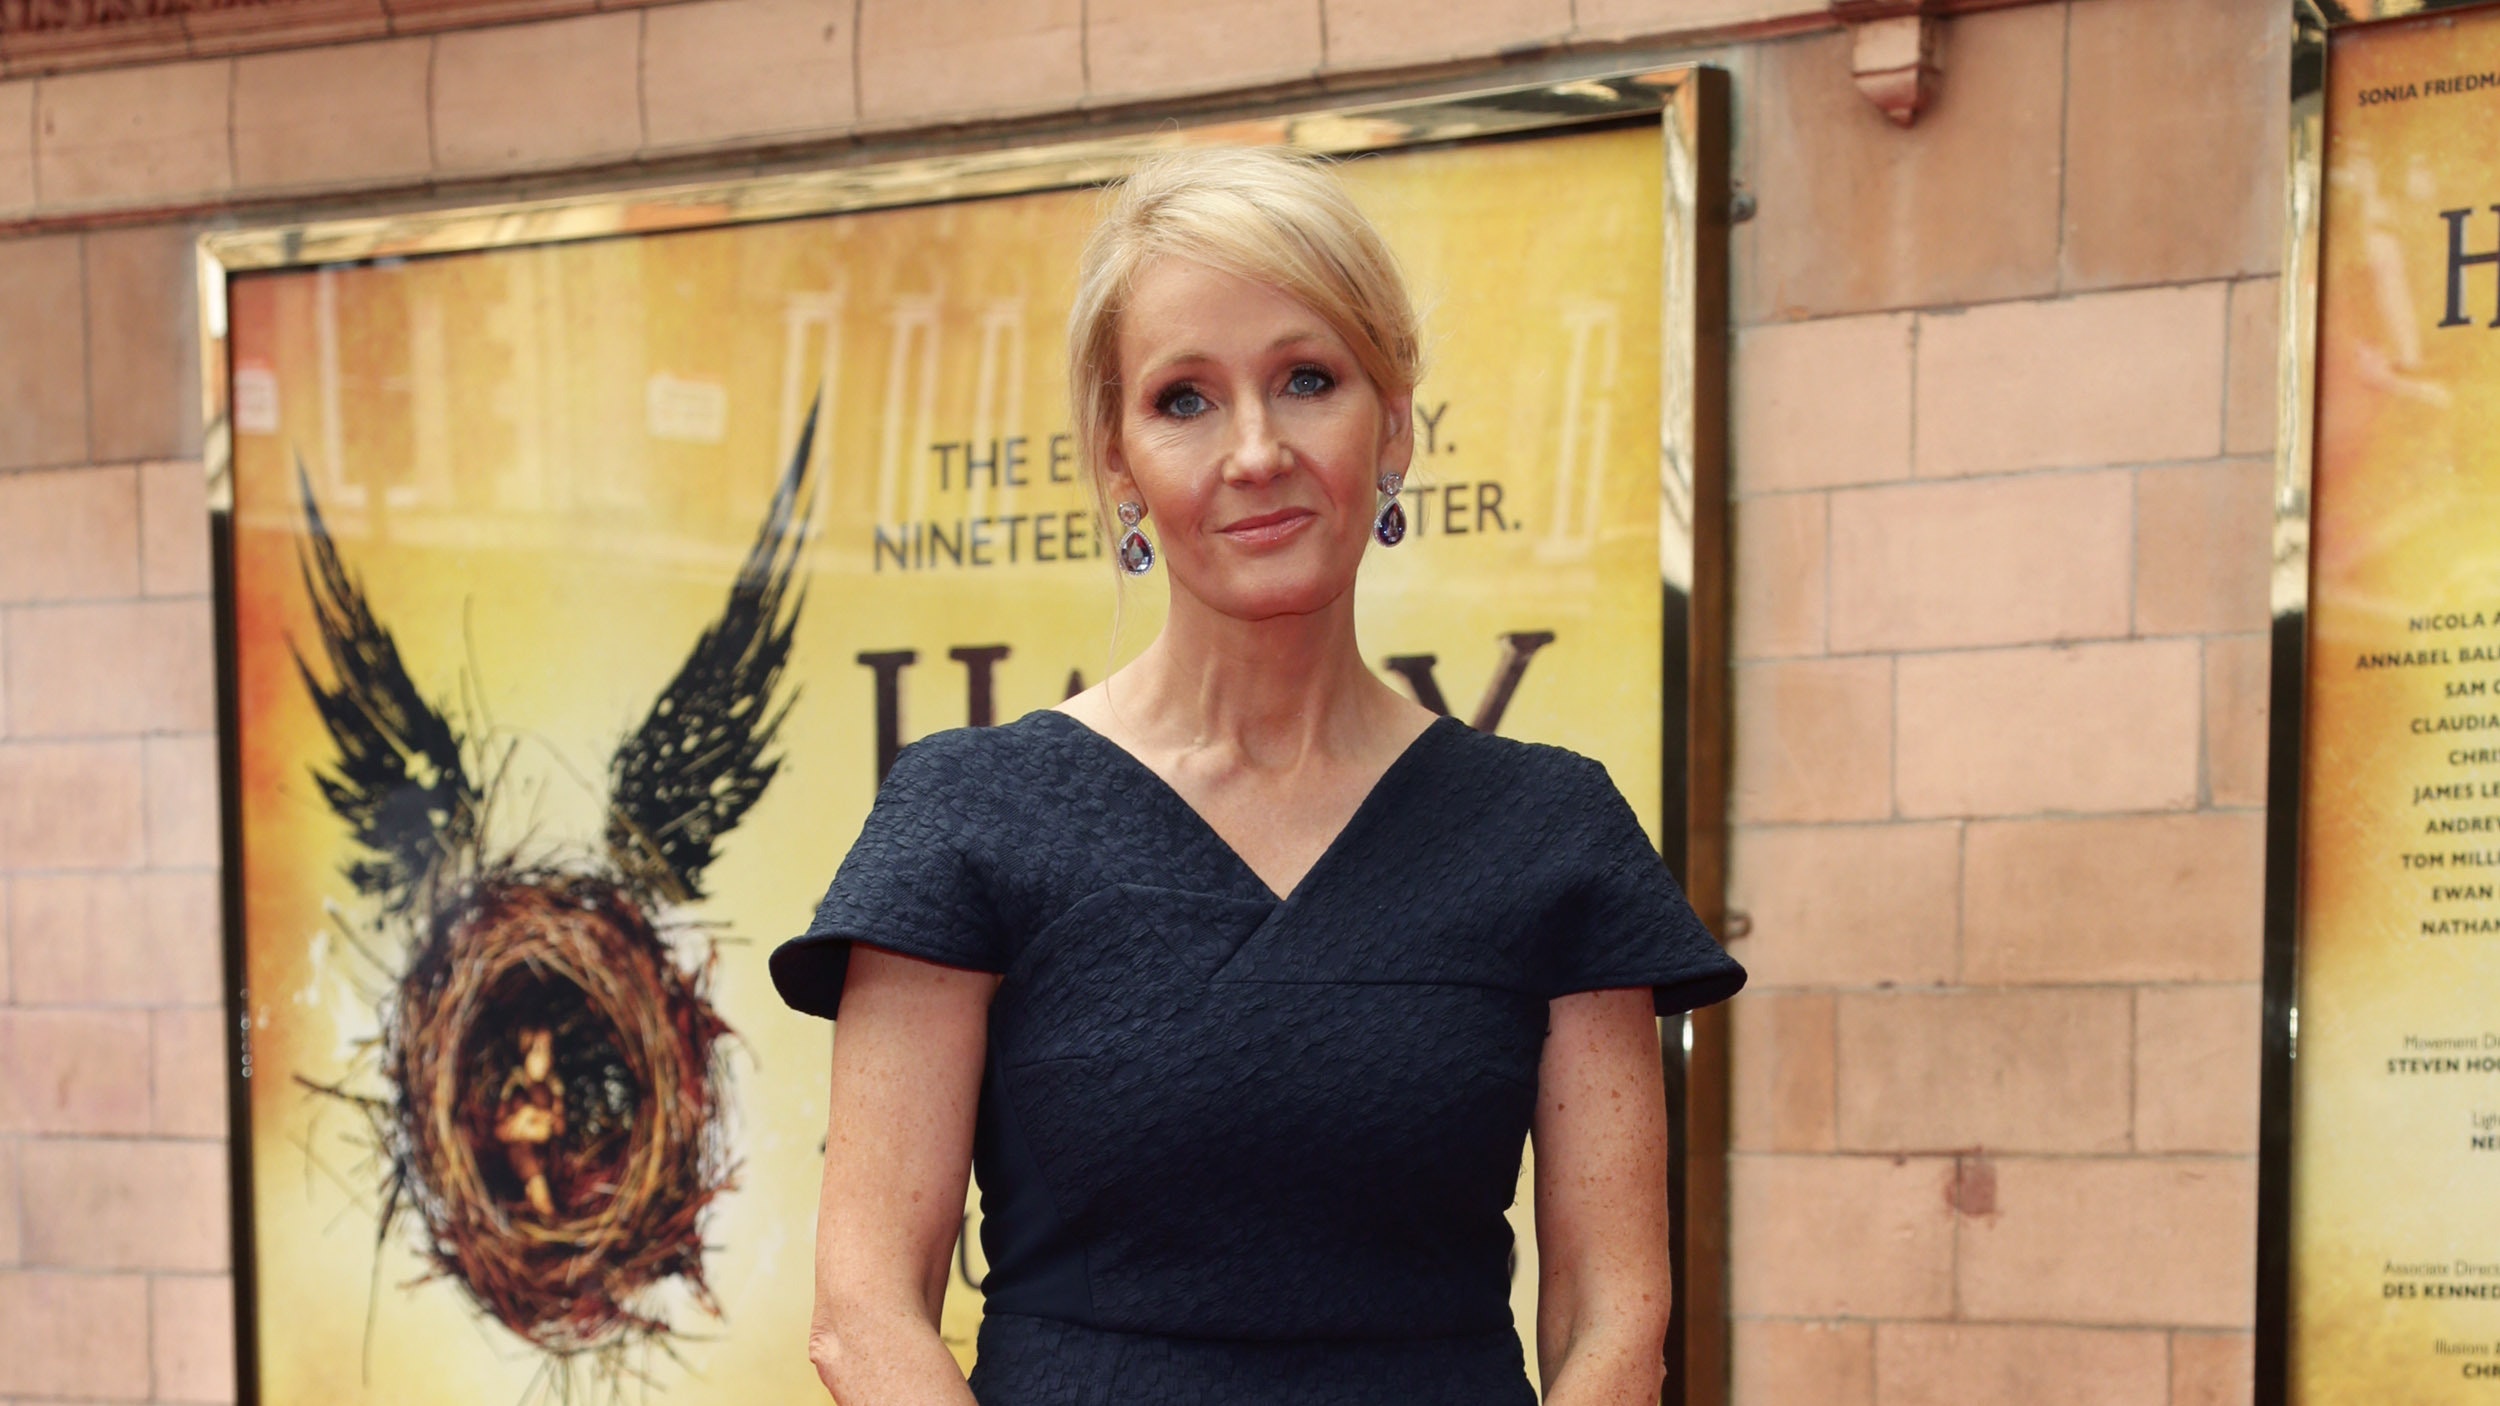 Harry Potter author JK Rowling sparks fan speculation with cryptic tweet